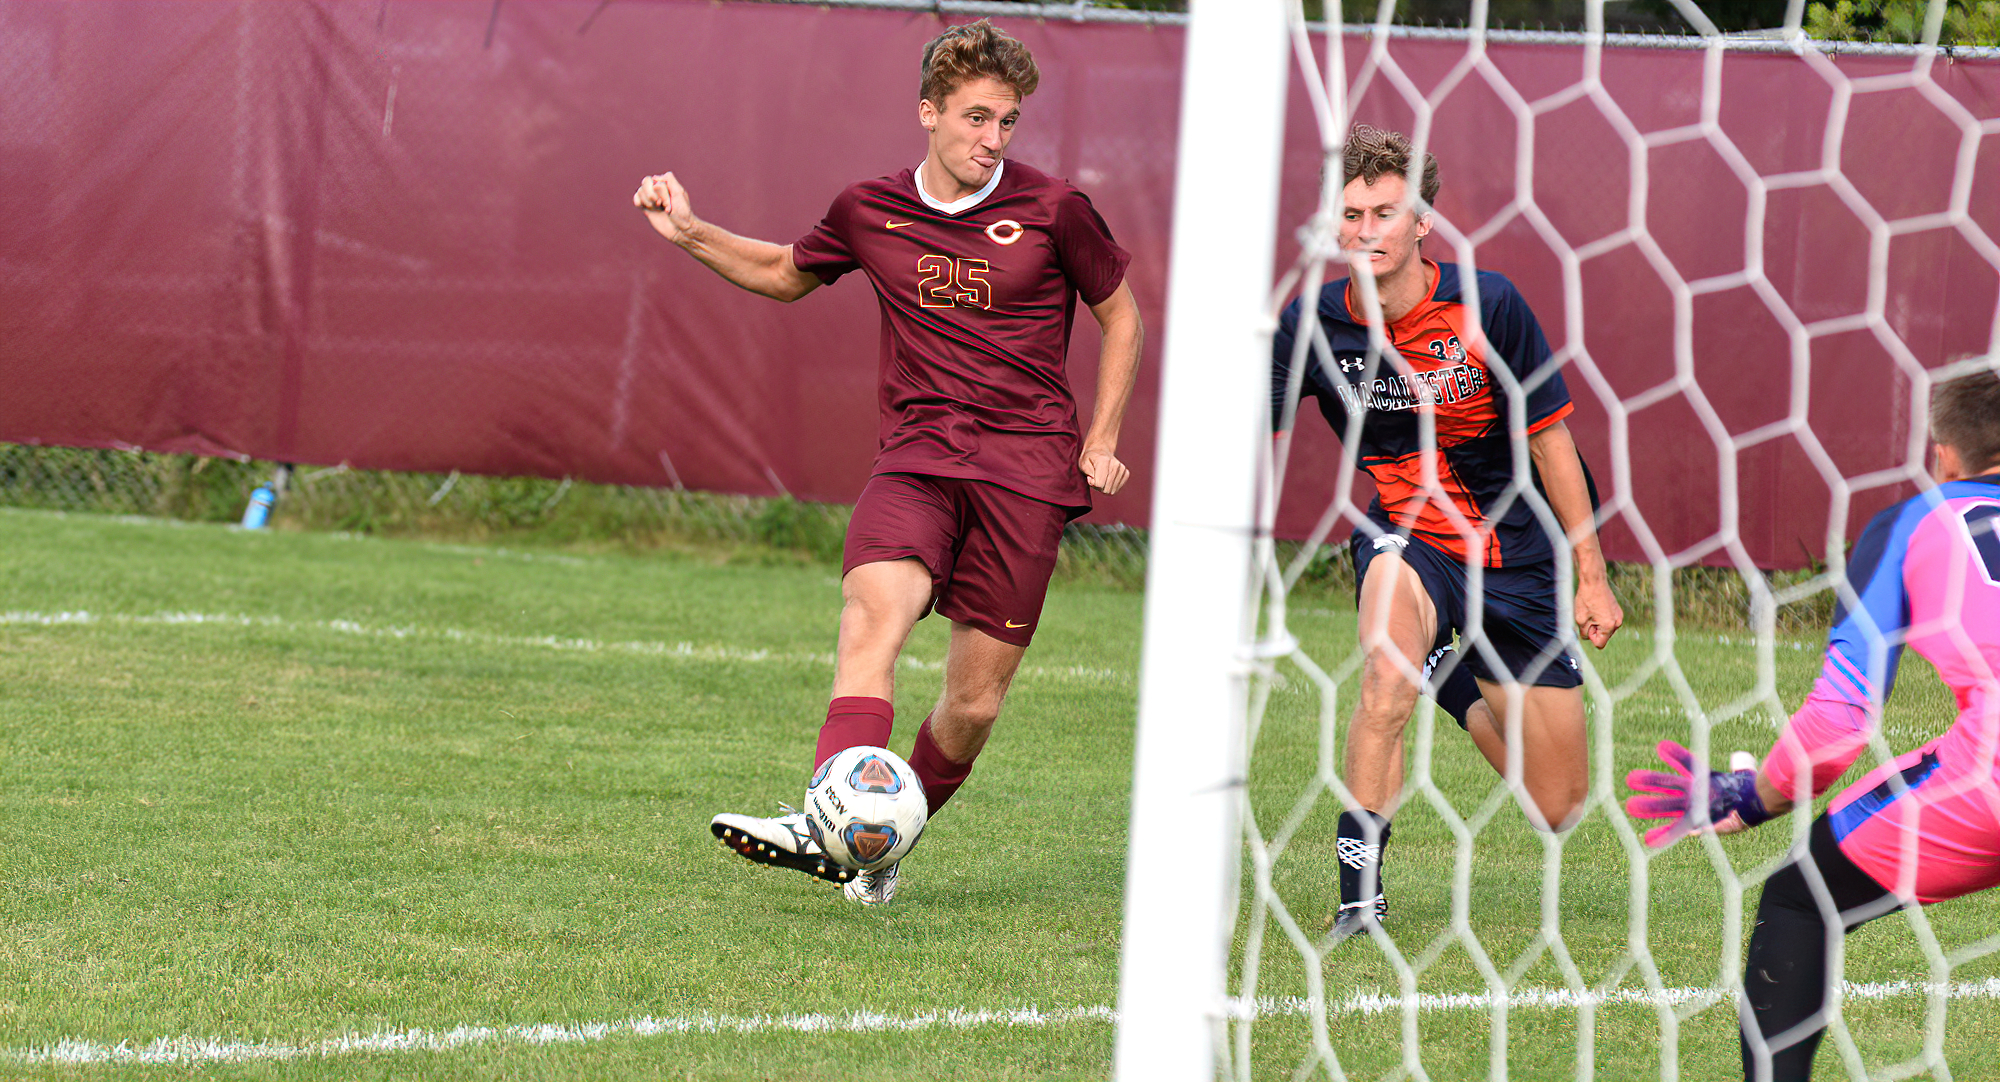 Gannon Brooks slots home the Cobbers' second goal in their game against Macalester. The score was Brook's team-leading third of the year.